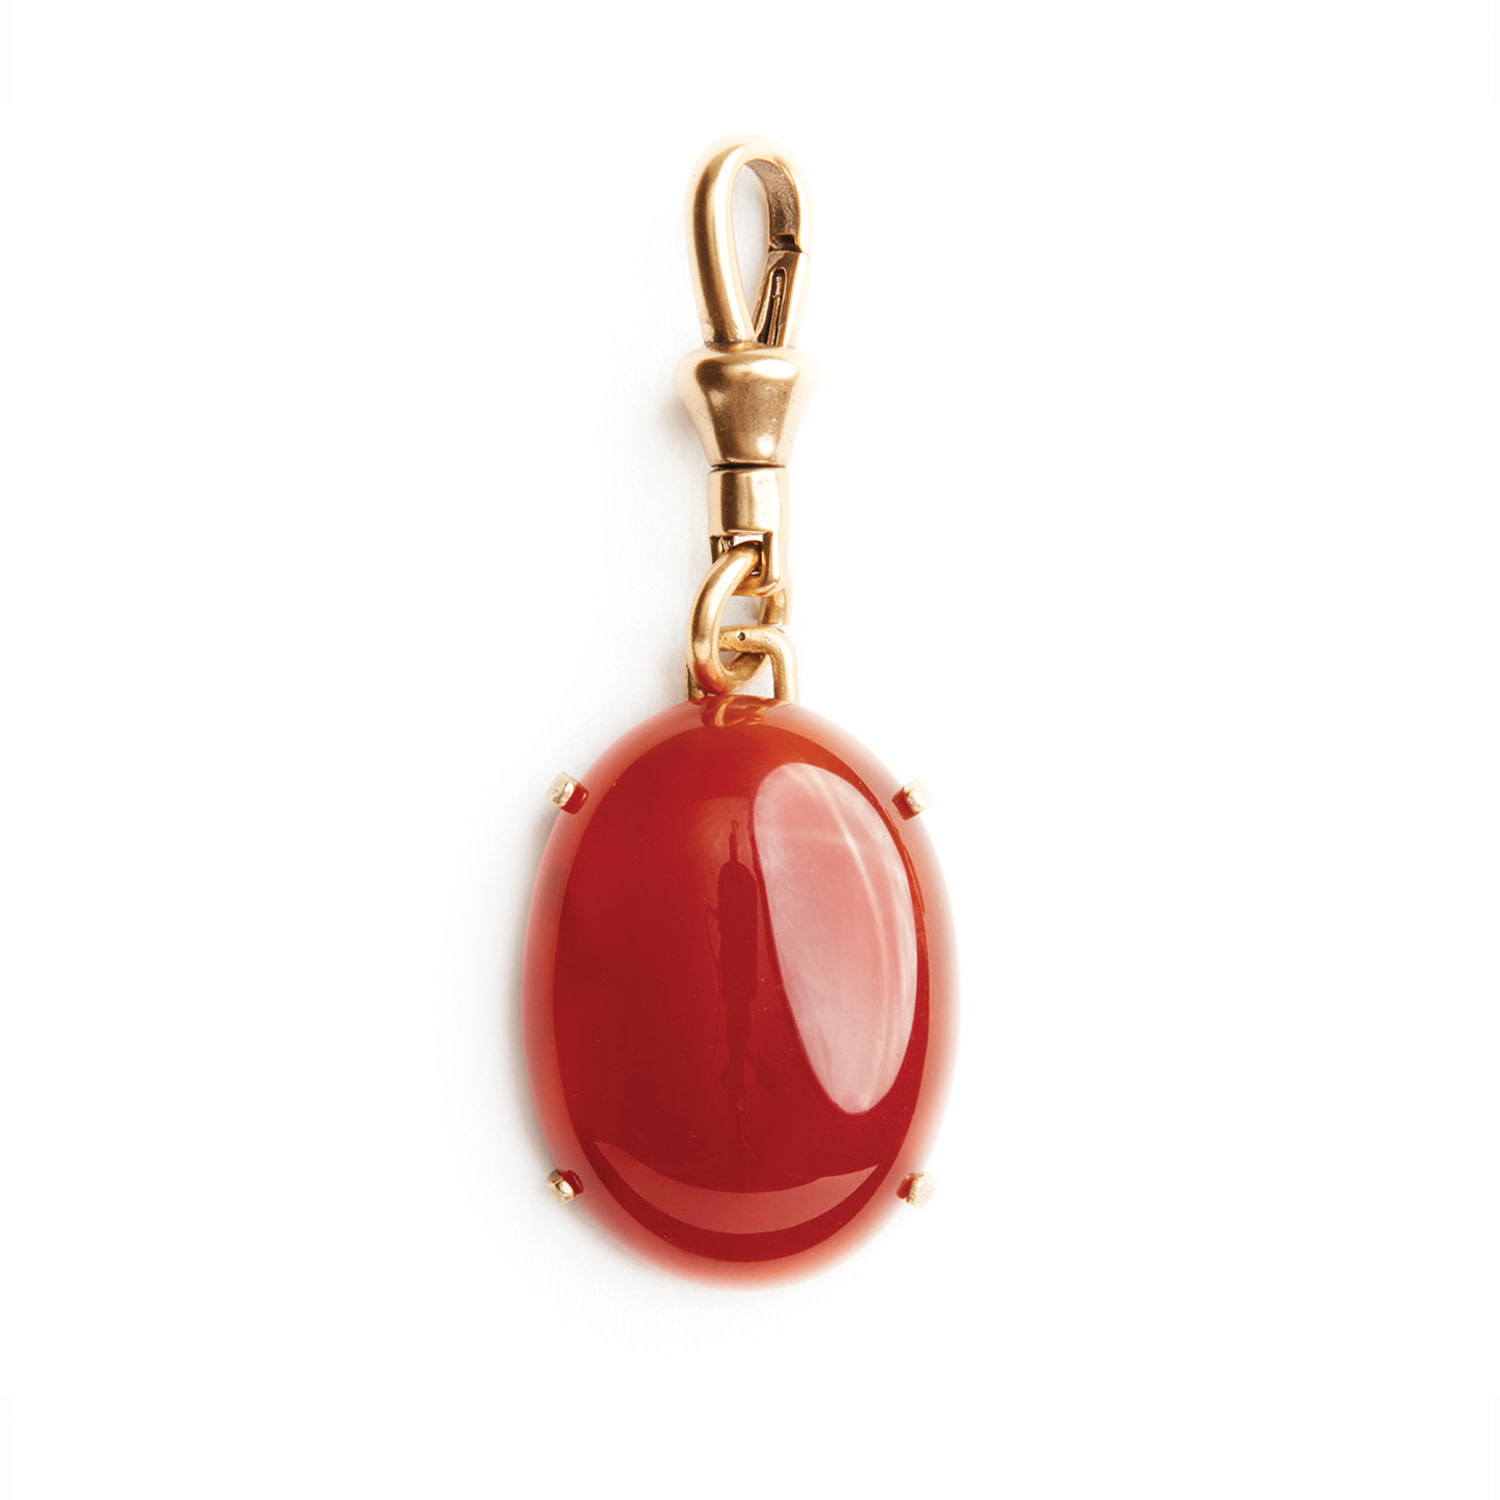 Amazon.com: Carnelian Crystal Necklace Band Ring with Silver Plated  Carnelian Stone Red Agate Necklace - Carnelian Pendant Women Jewelry with  Adjustable Cord (Red) : Clothing, Shoes & Jewelry